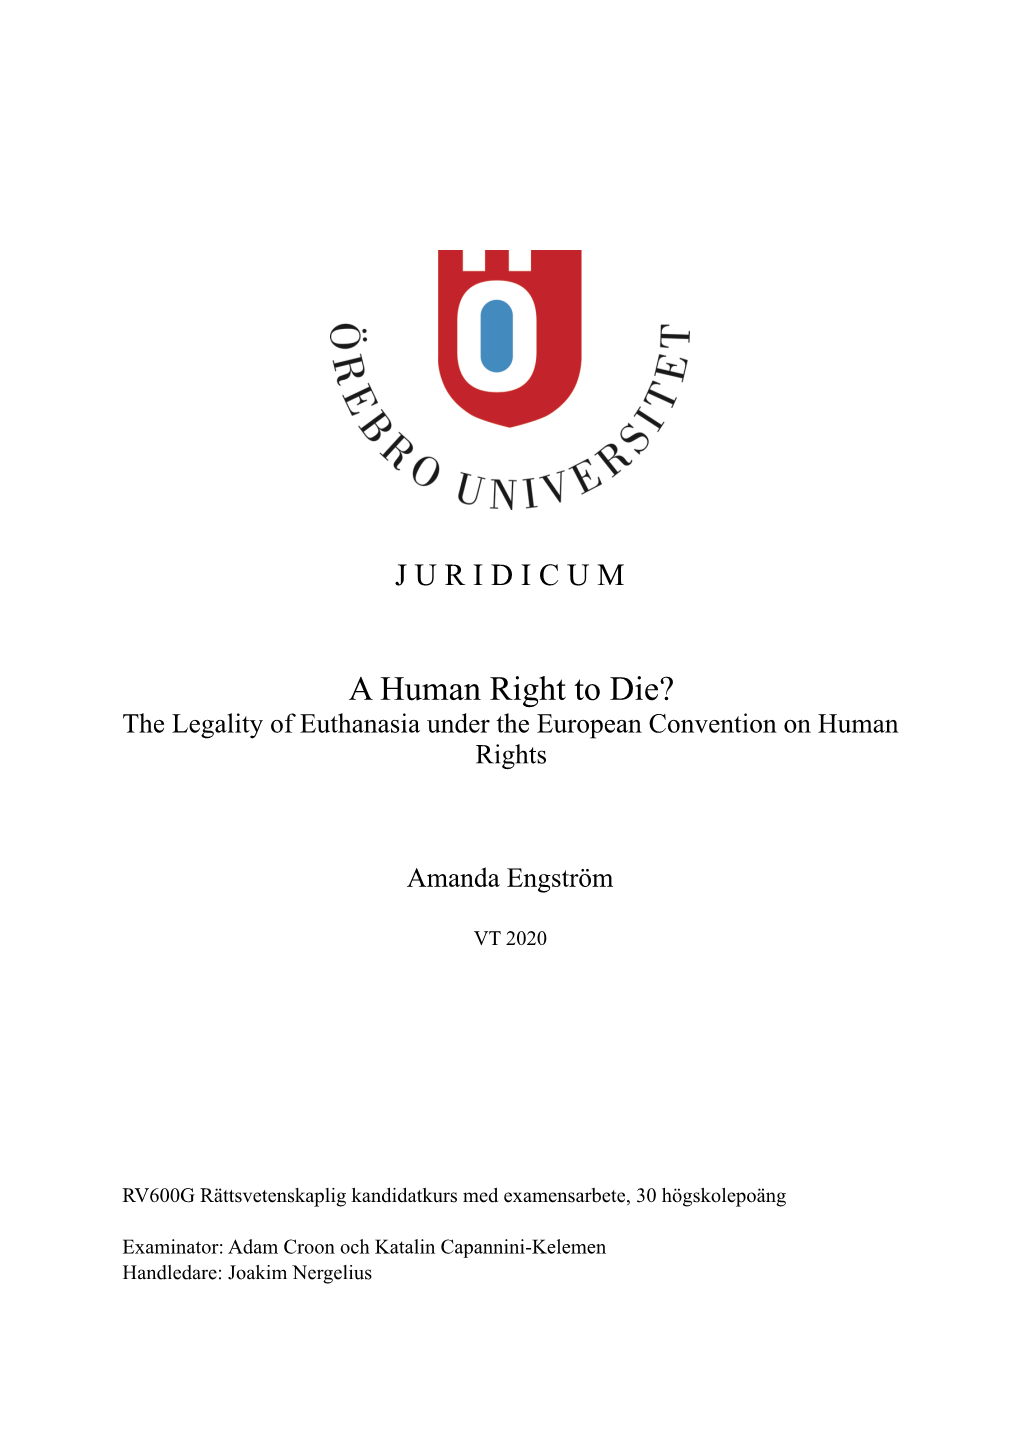 A Human Right to Die? the Legality of Euthanasia Under the European Convention on Human Rights